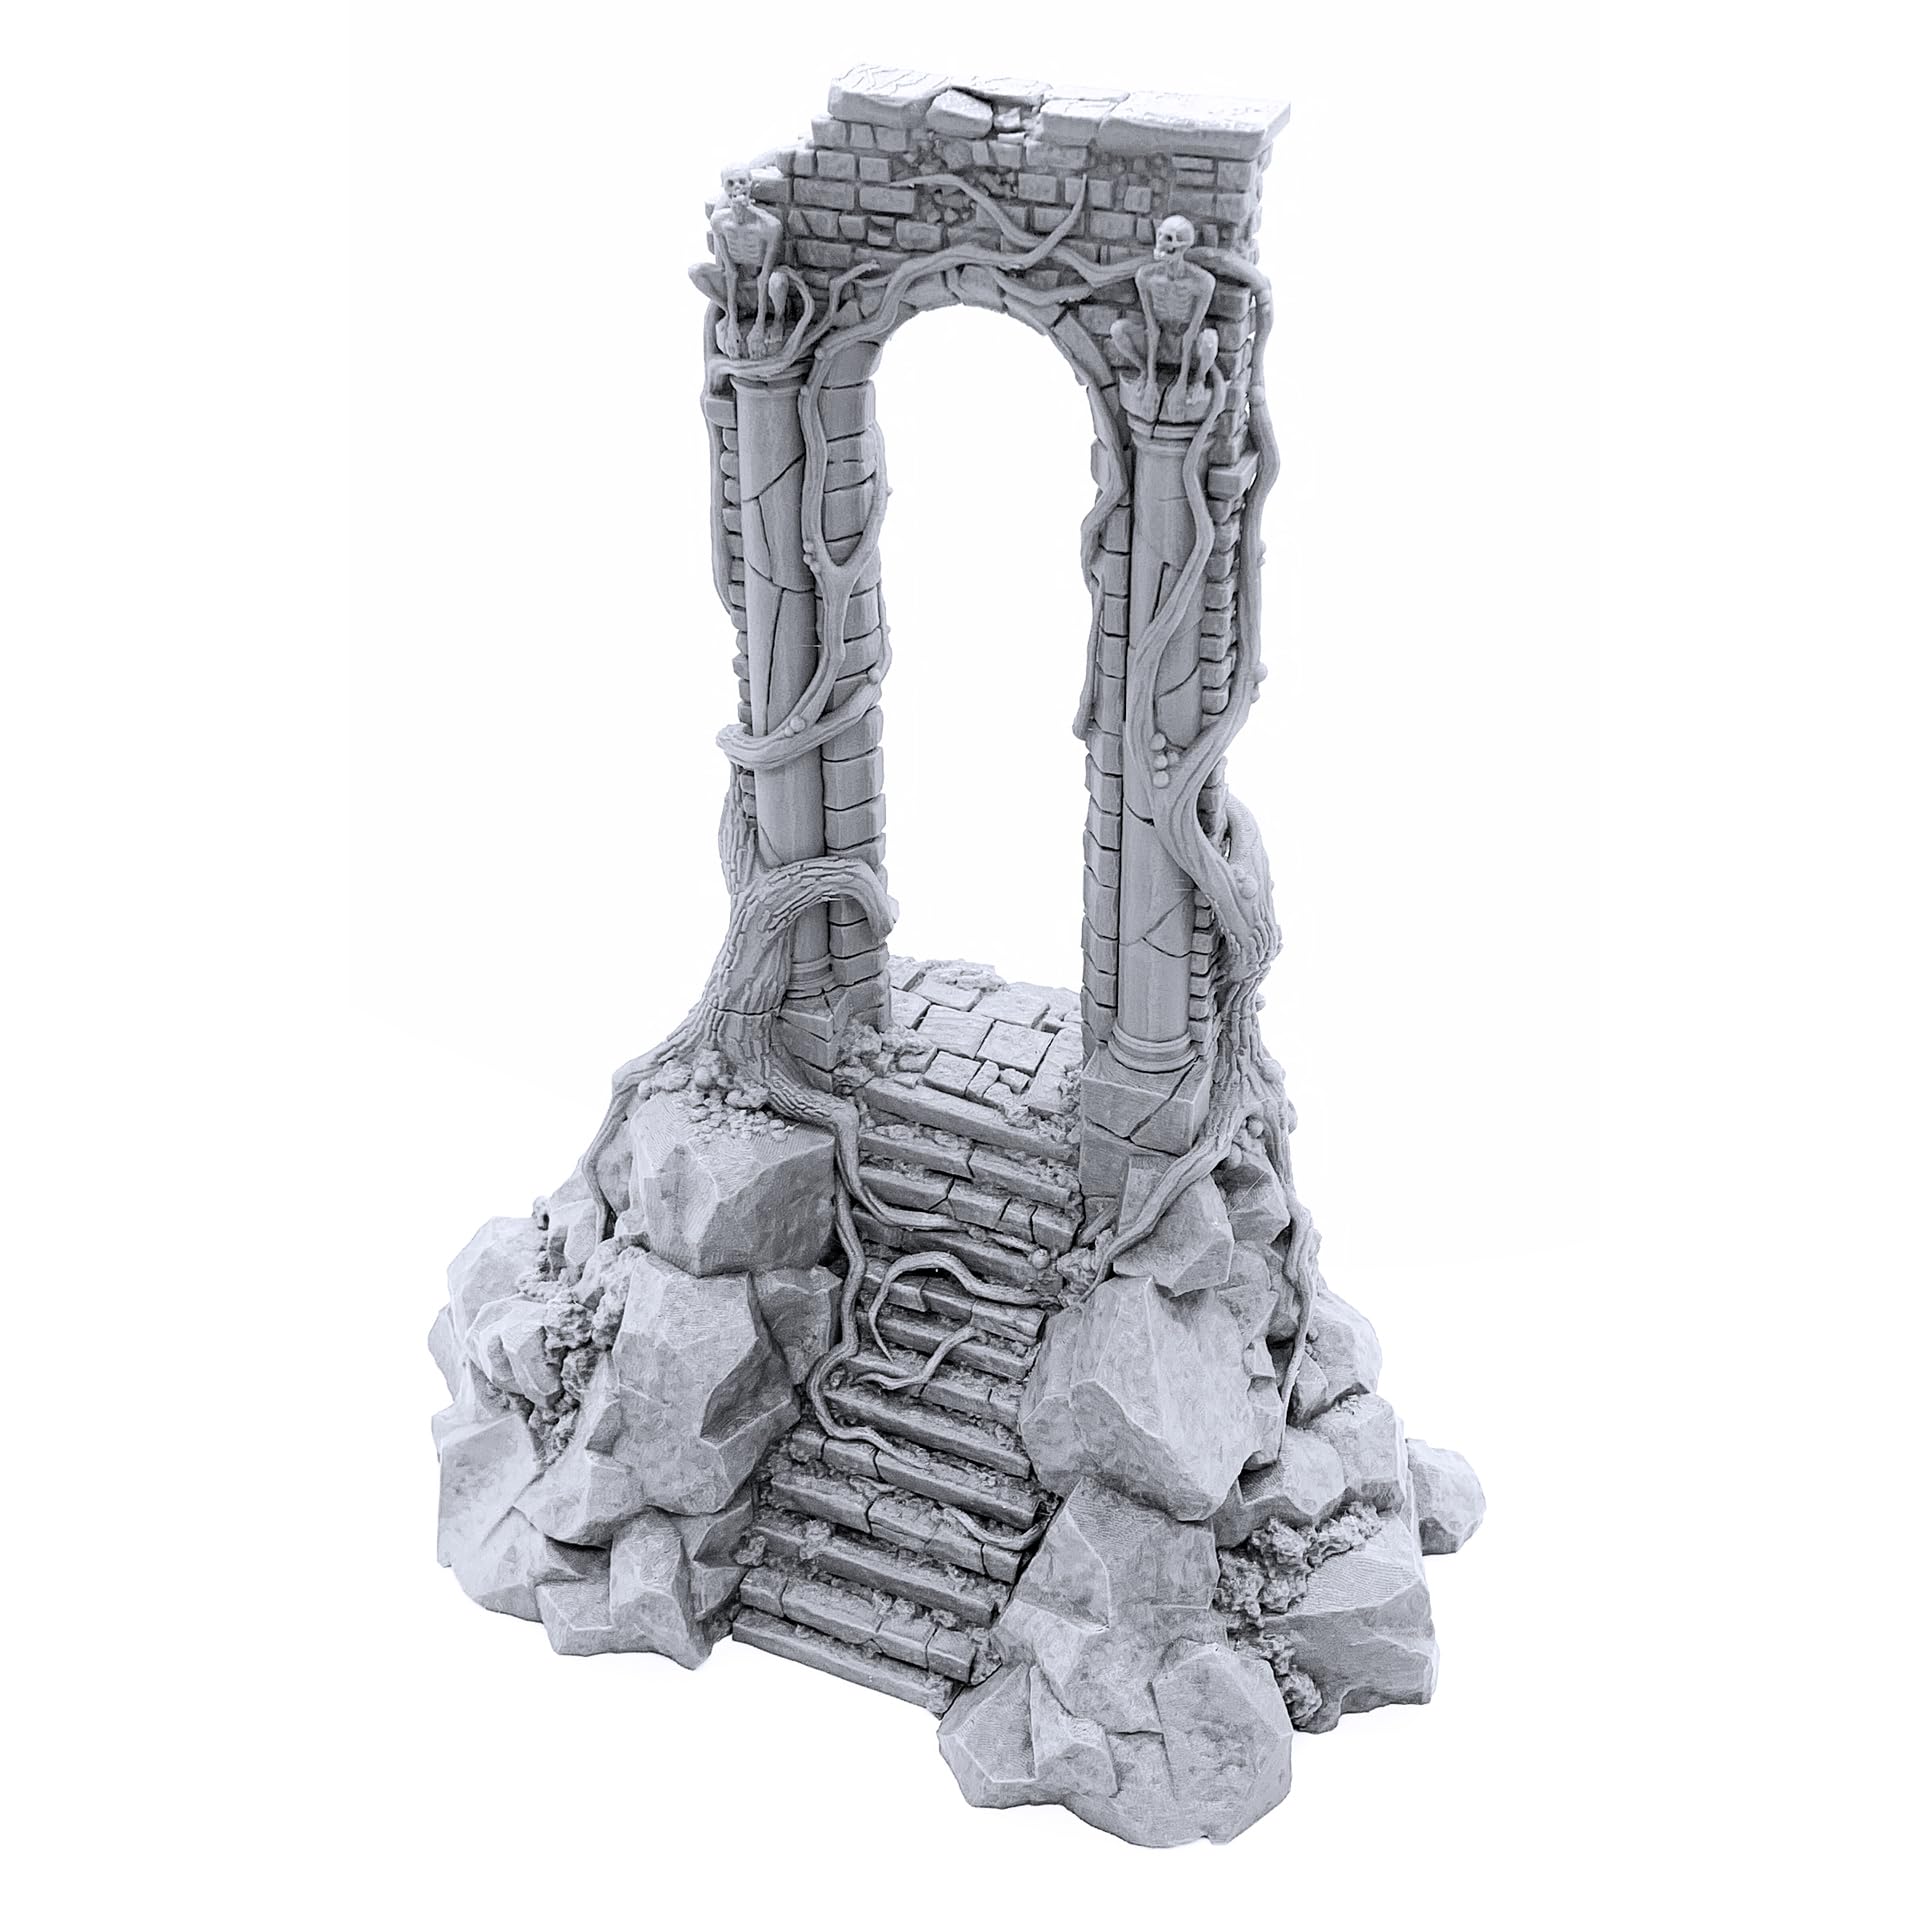 The Shadow Gate DND Terrain for Dungeons and Dragons Warhammer 40k 28mm ミニチュア ウォーゲーム 卓上RPG ウ